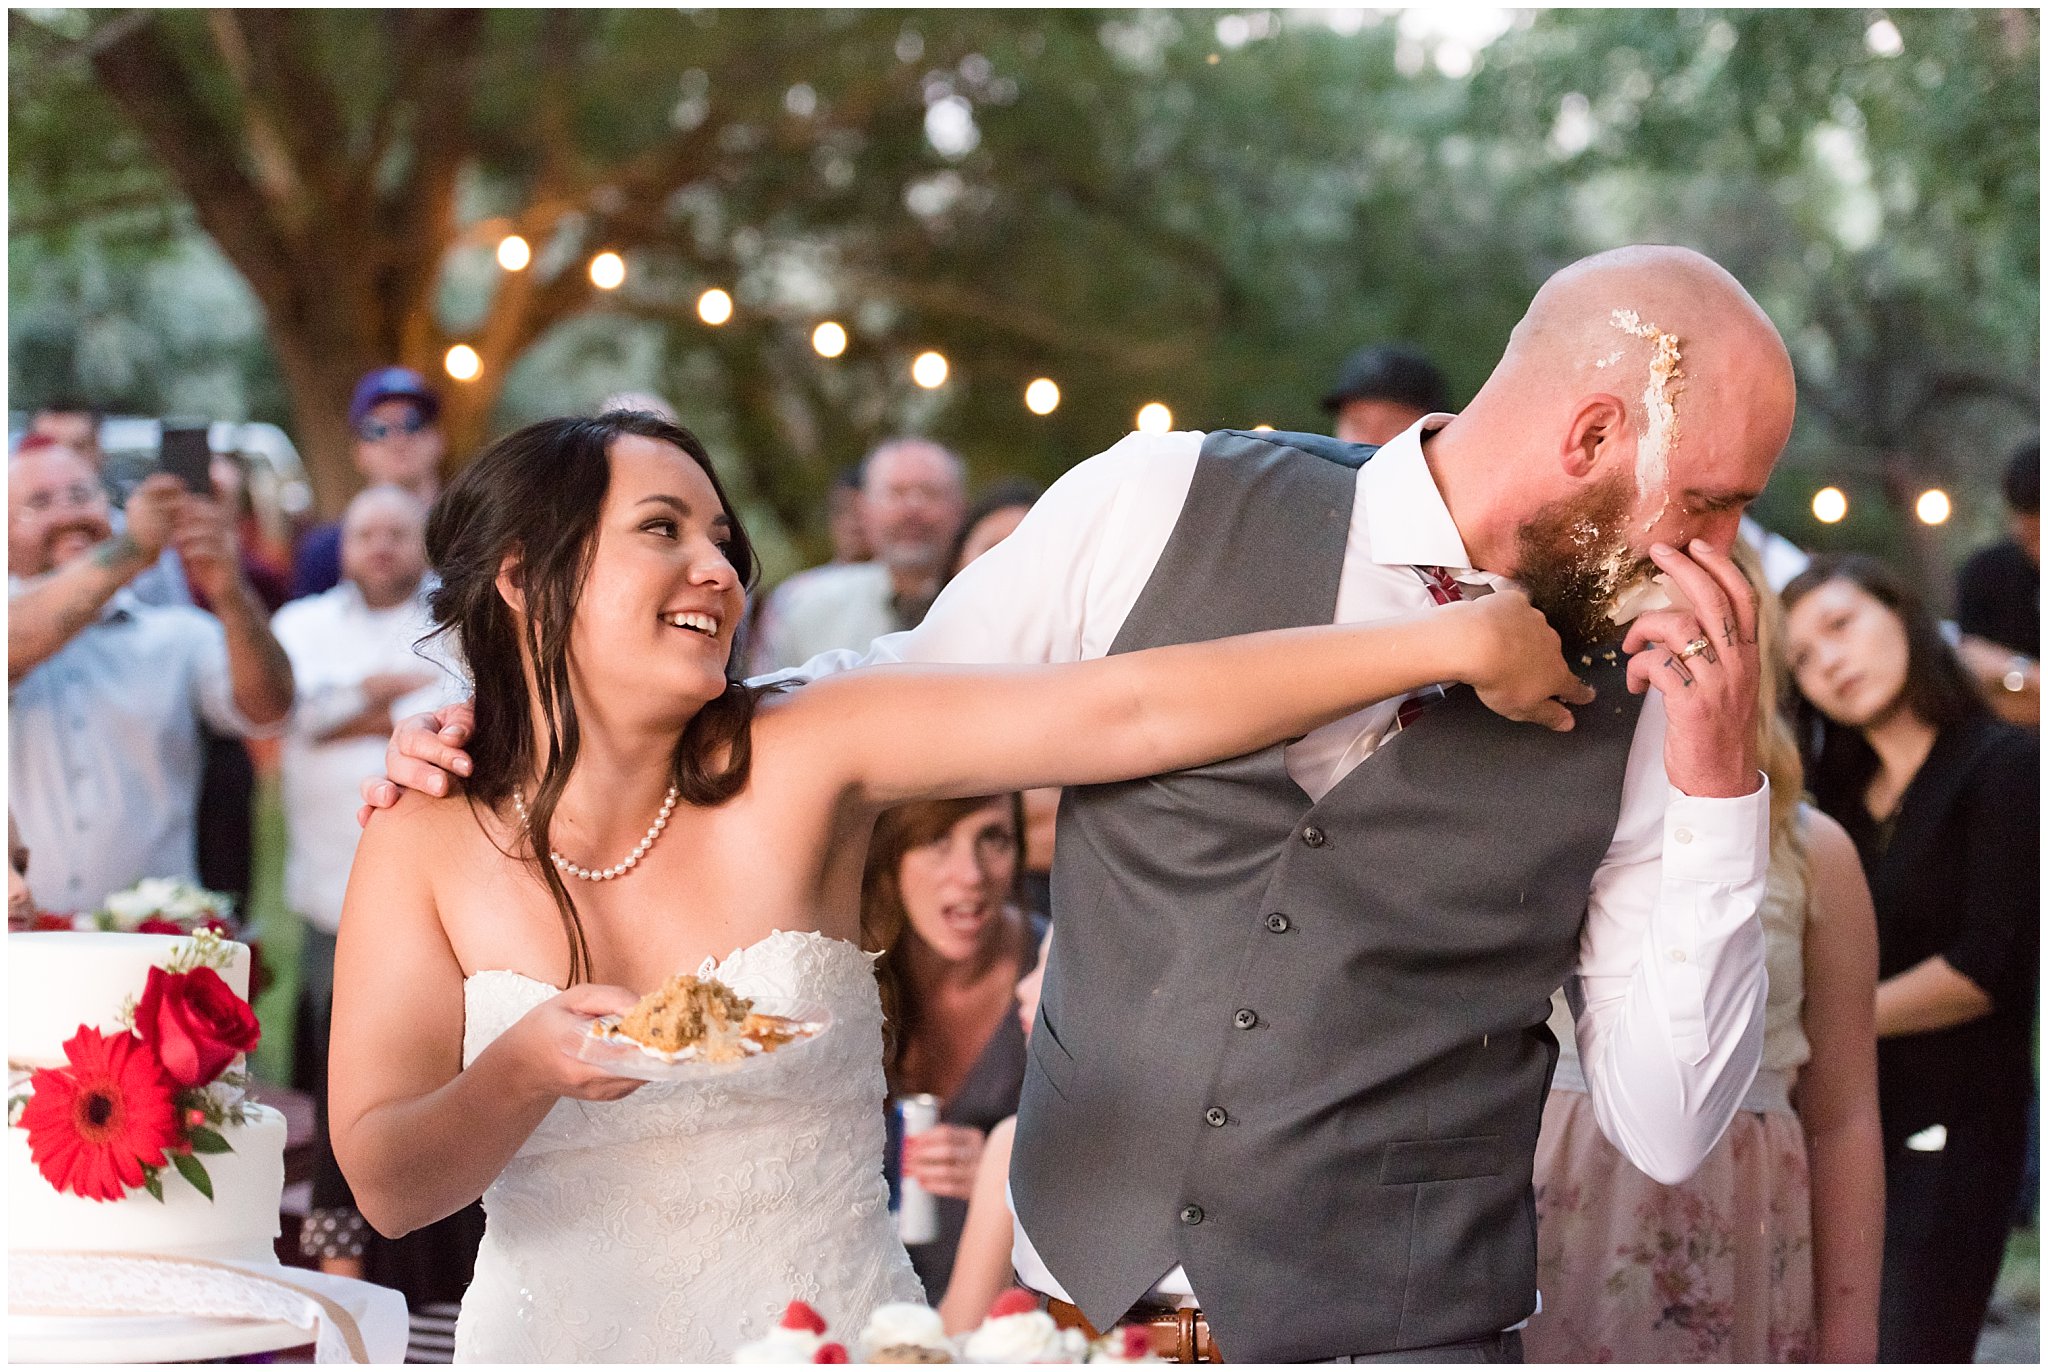 Davis County Wedding | Bride smashes cake in grooms face | Jessie and Dallin Photography